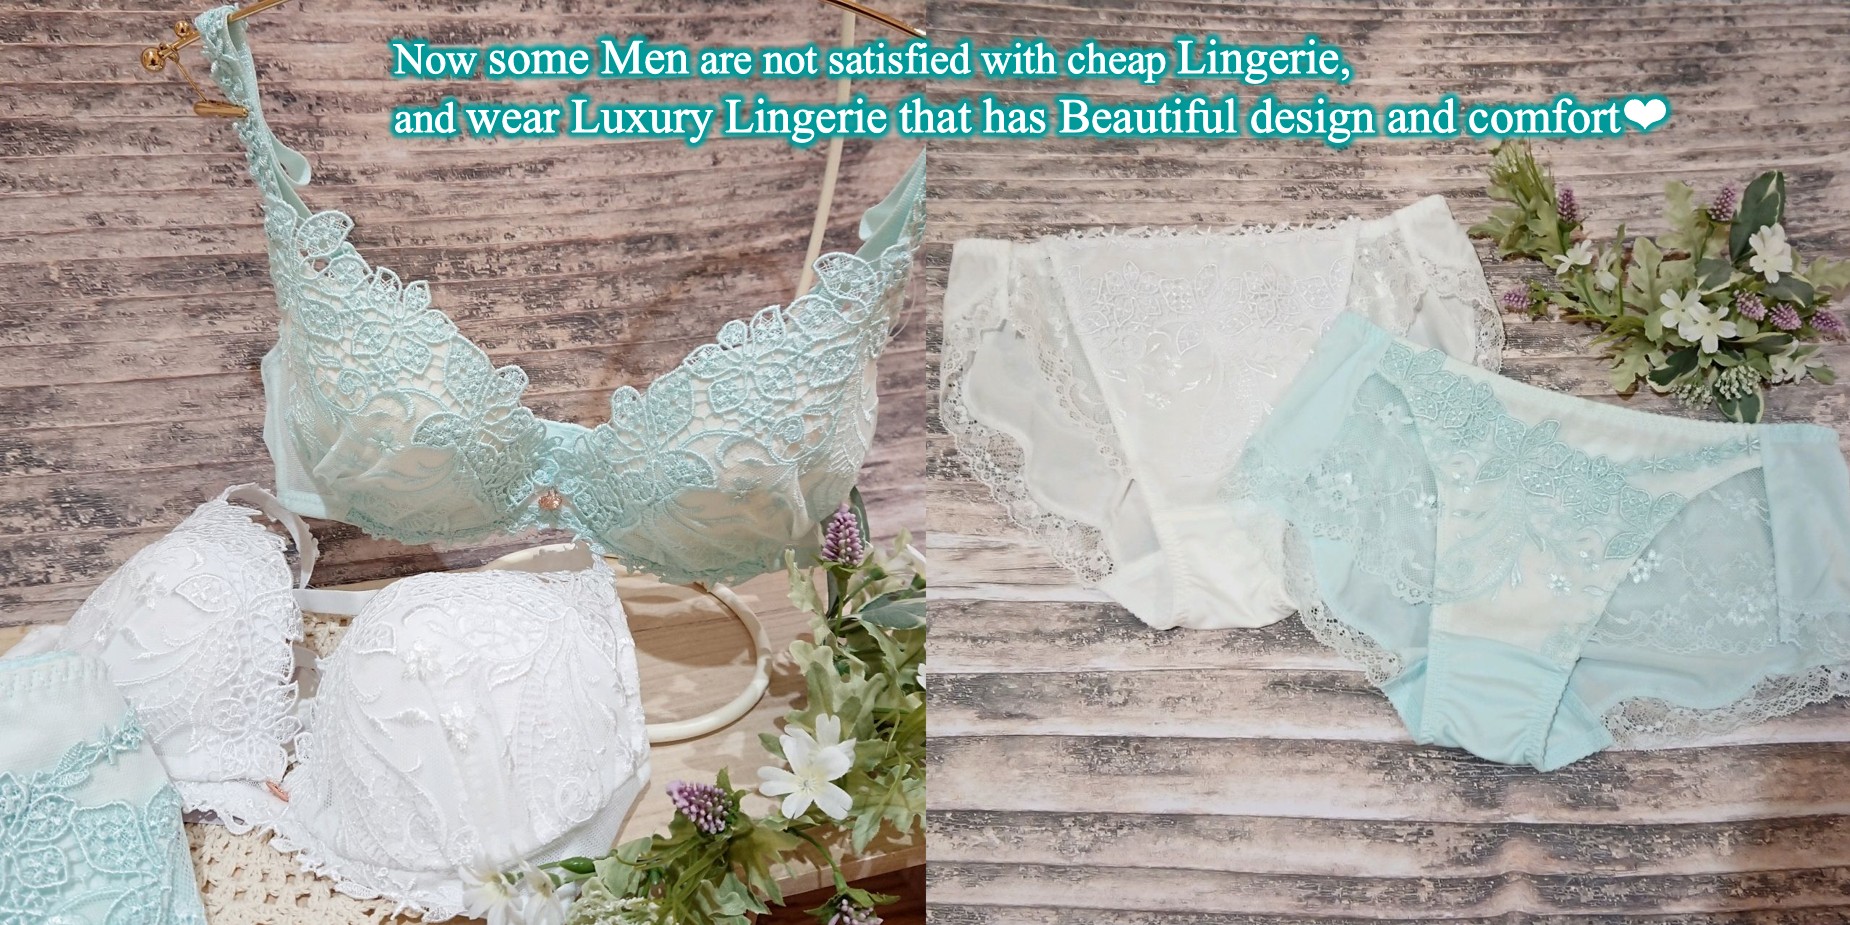 Some Men are not satisfied with cheap Lingerie and wear Luxury Lingerie JE